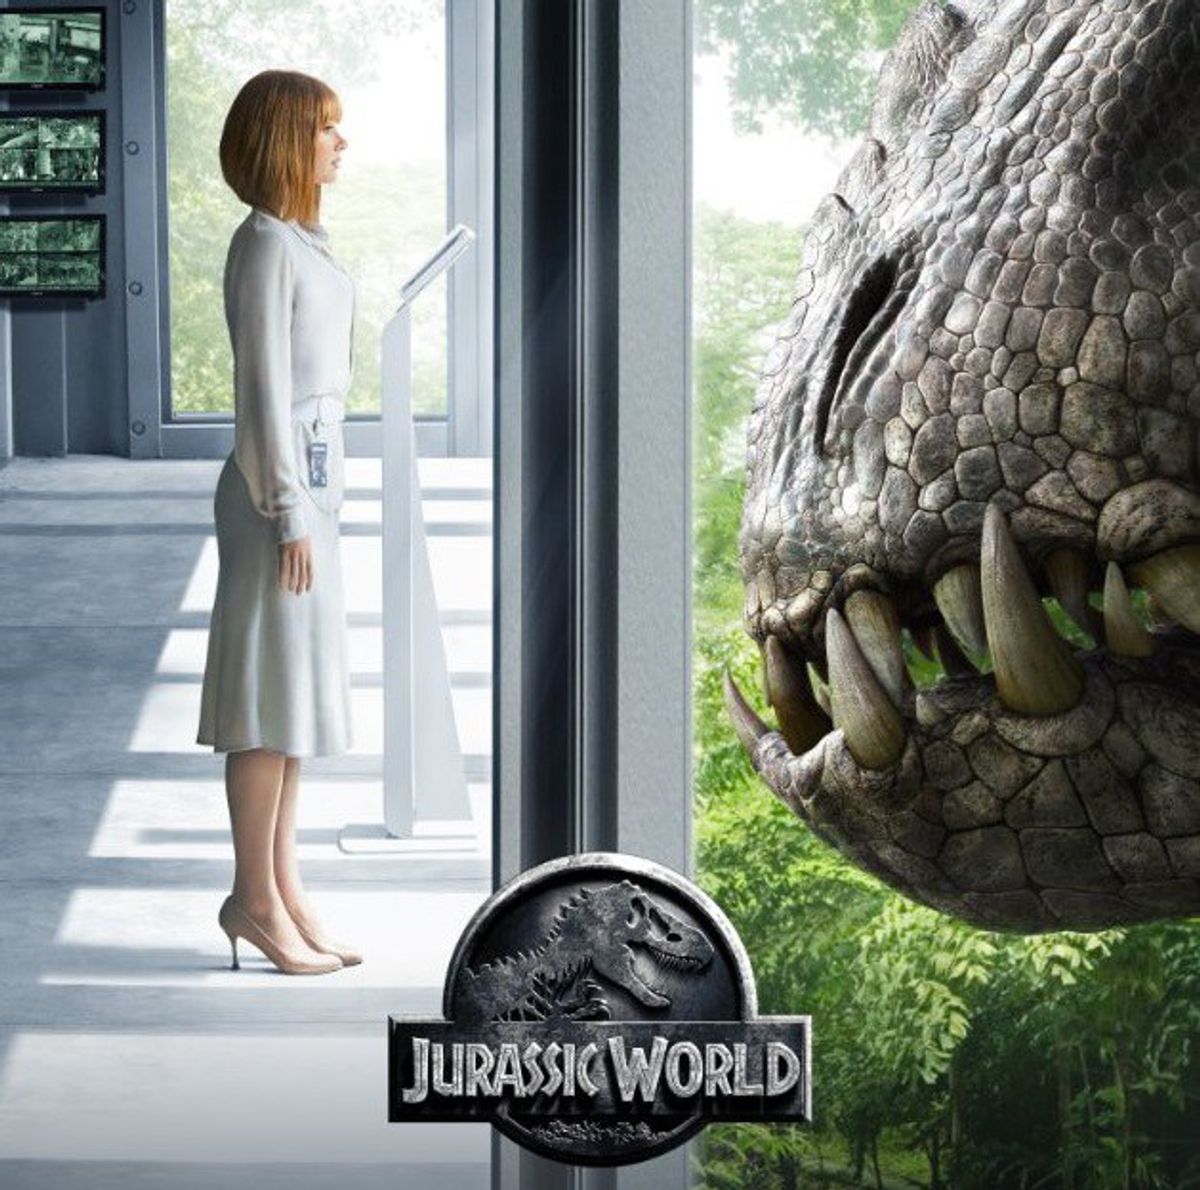 How Claire Dearing Of 'Jurassic World' Embodies The Idea Of A Strong Woman